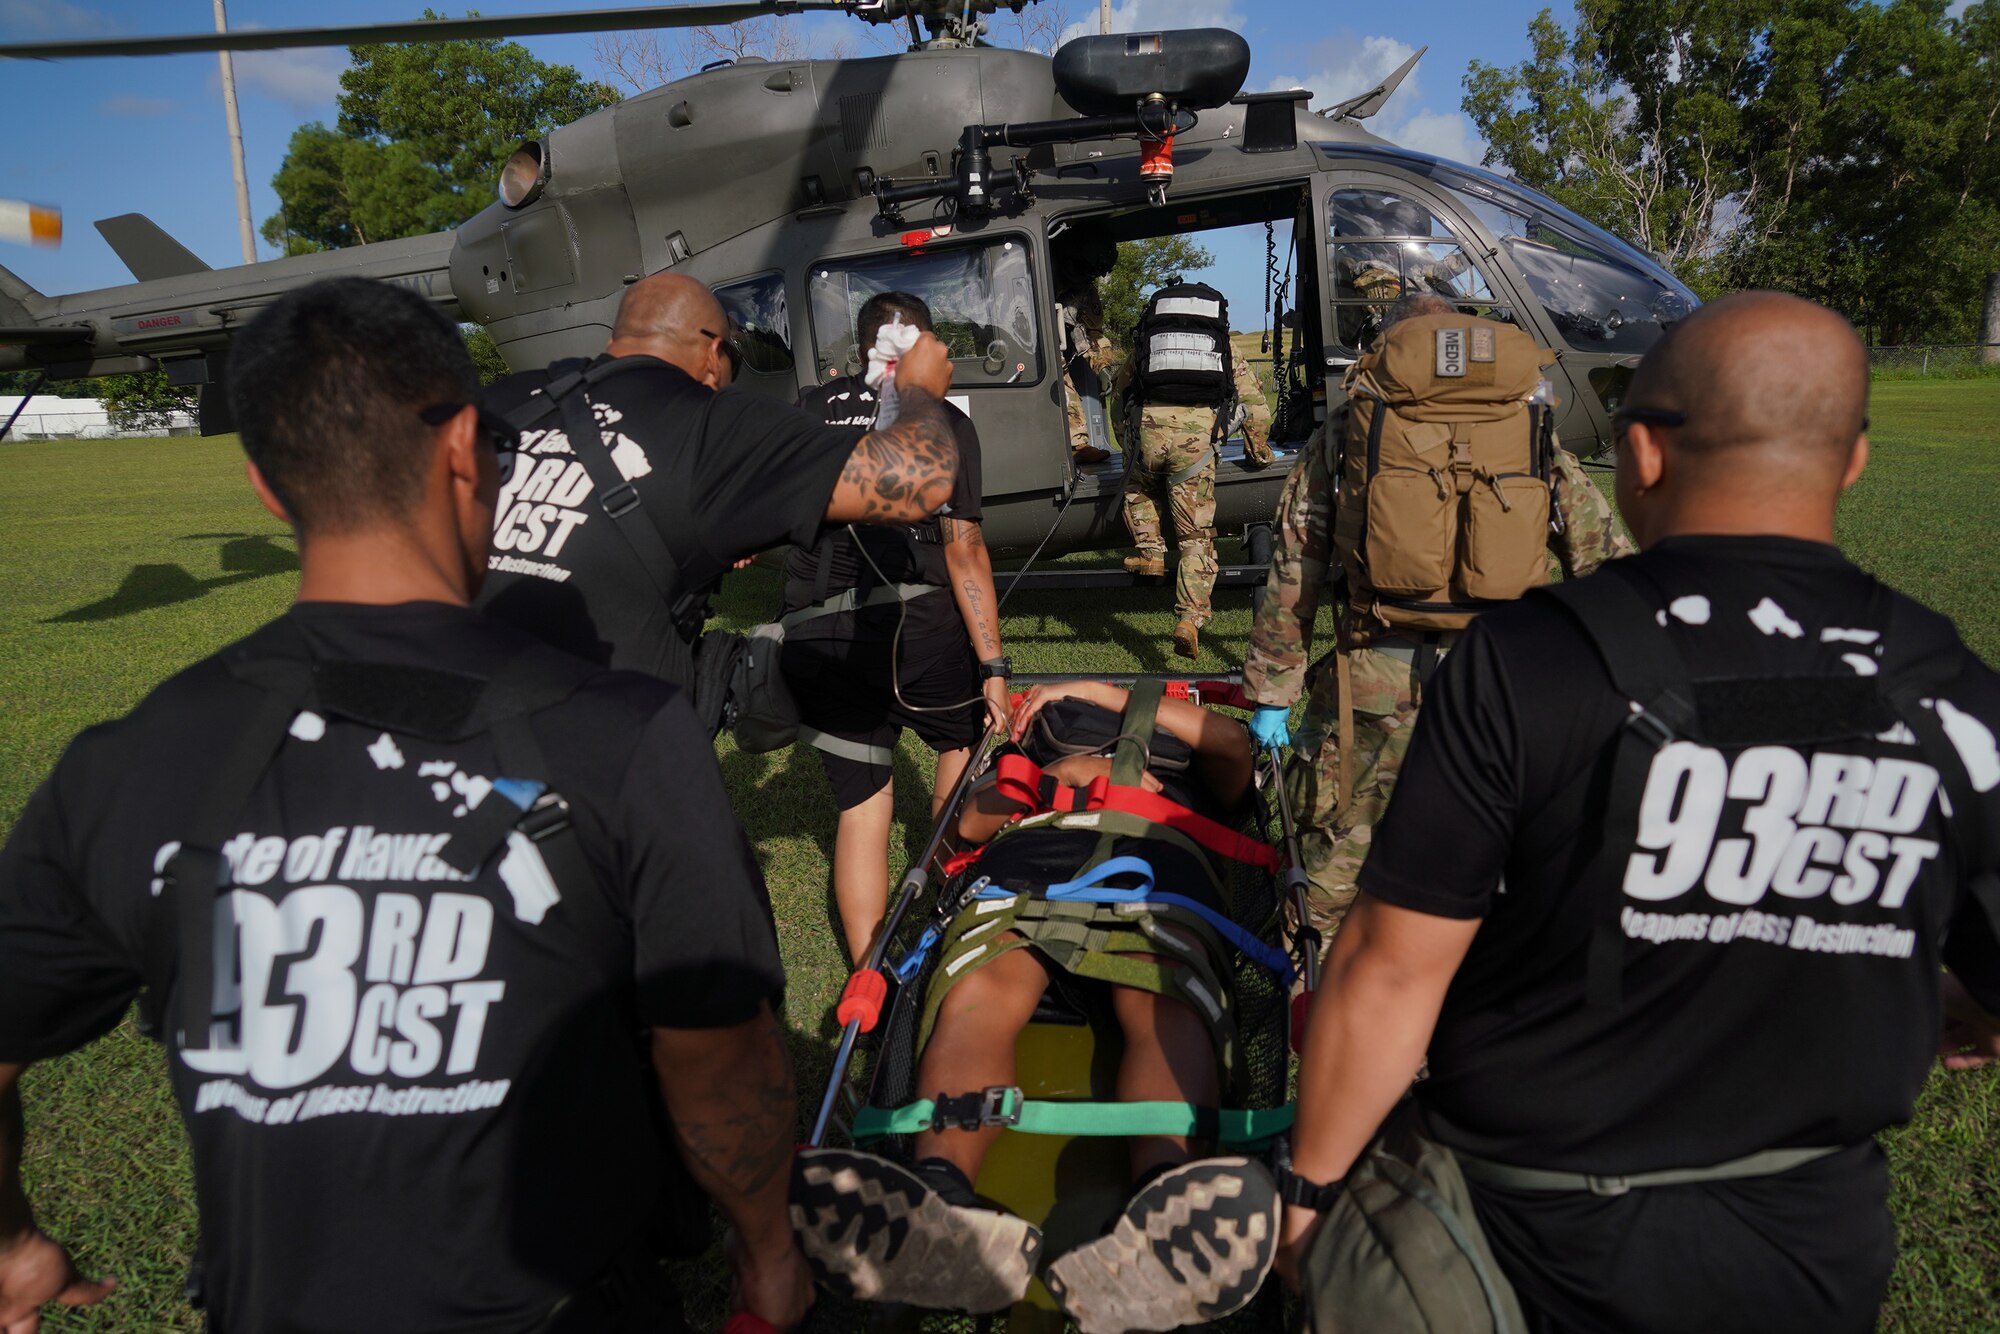 Members of the 93rd CST load an Airman with a simulated injury on a Guam National Guard Lakota helicopter for transport during exercise Vigilant Guard 2020, Guam, Nov. 21, 2019. Vigilant Guard is a series of exercises that take place in each FEMA region annually. The training exercise program sponsored by U.S. Northern Command, in conjunction with National Guard Bureau, provides civilian-military first responders and emergency management personnel the opportunity to evaluate their capabilities and identify areas for improvement, in the most realistic, large-scale disaster scenarios possible. (U.S. Air National Guard photo by Tech. Sgt. Andrew Jackson)